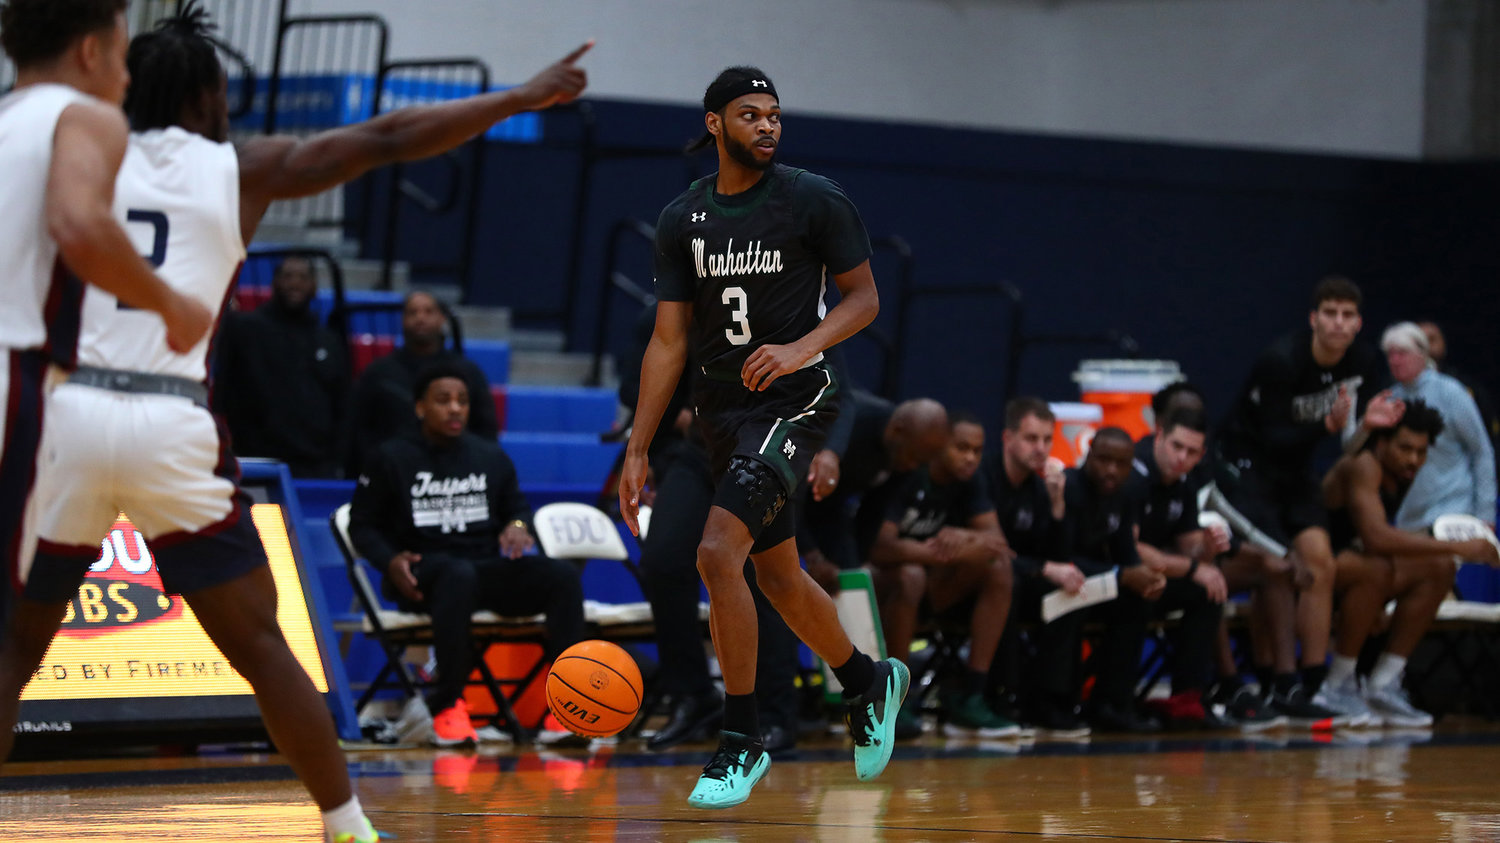 Ant Nelson of Manhattan College looks for a teammate to pass to as he dribbles mid-court in the team’s opening week. The Jaspers are off to an 0-2 start under new coach RaShawn Stores.